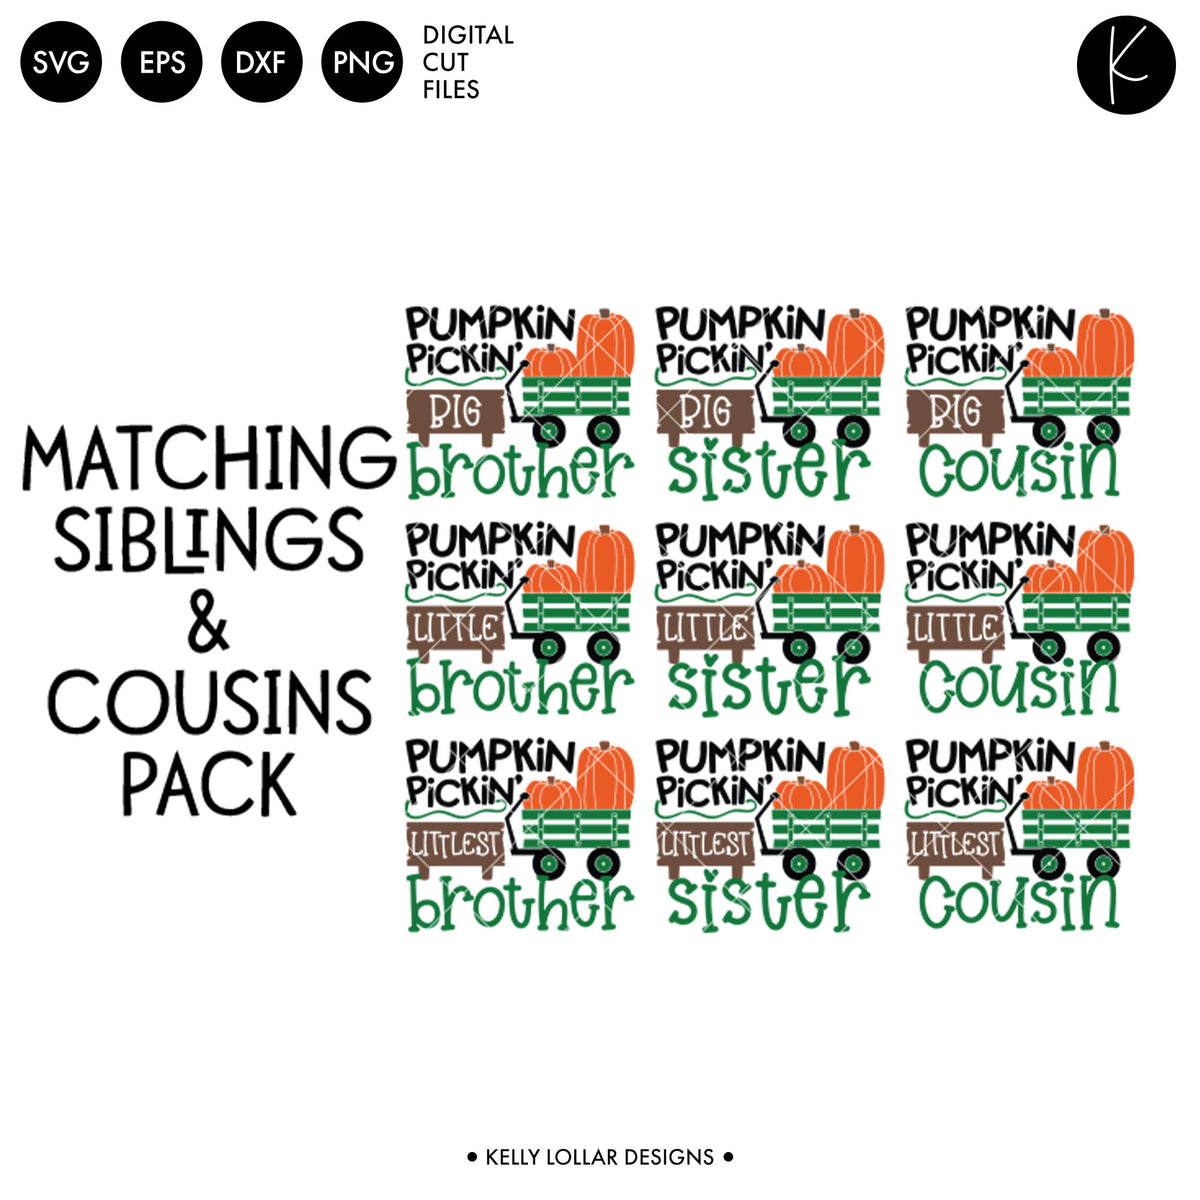 Pumpkin Picking Family Pack | SVG DXF EPS PNG Cut Files